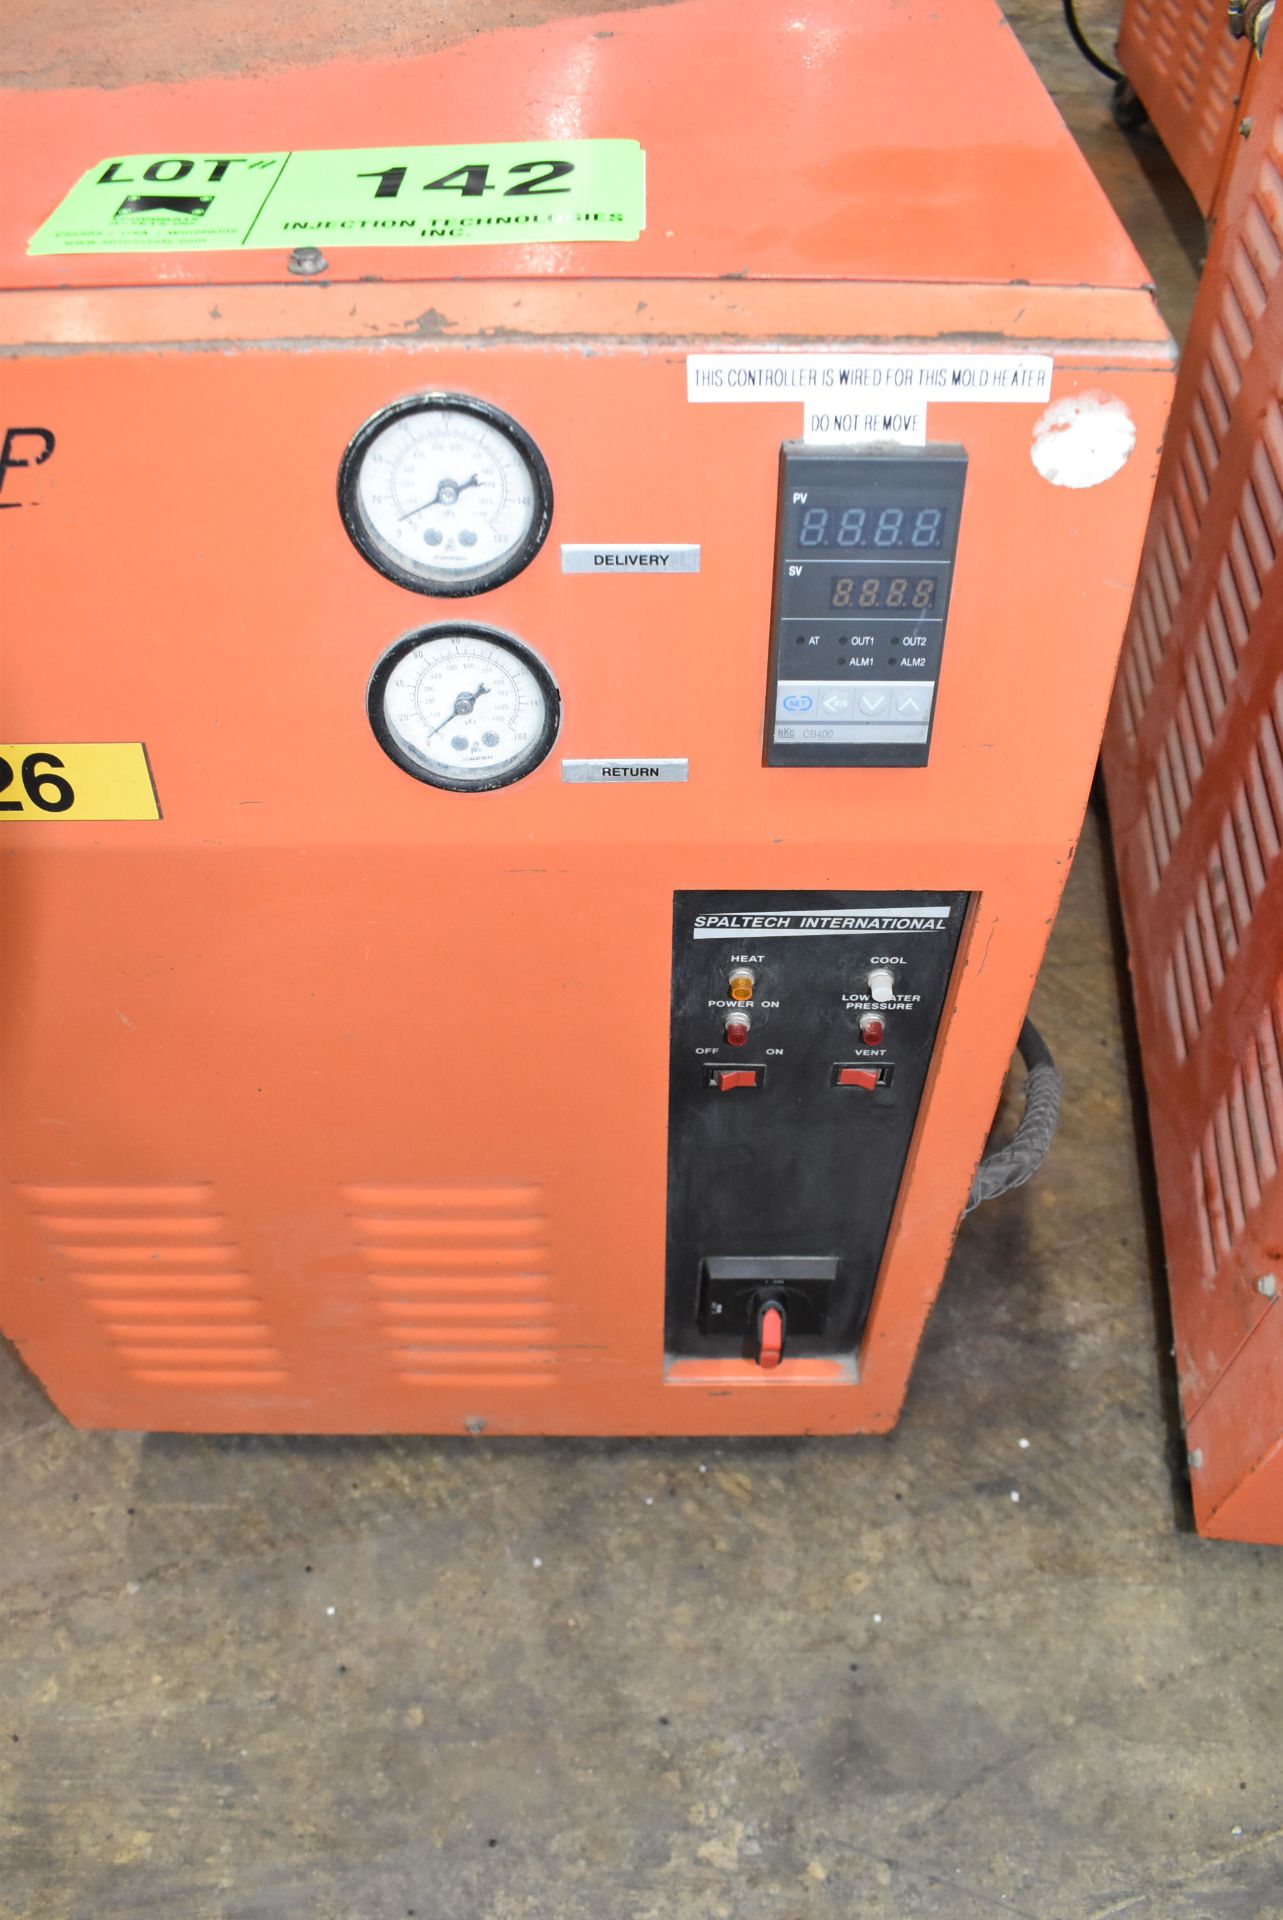 SPALTEC D-1209-5 DIGITAL WATER TEMPERATURE CONTROLLER, S/N 94-11-273 [RIGGING FEES FOR LOT #142 - $ - Image 2 of 2